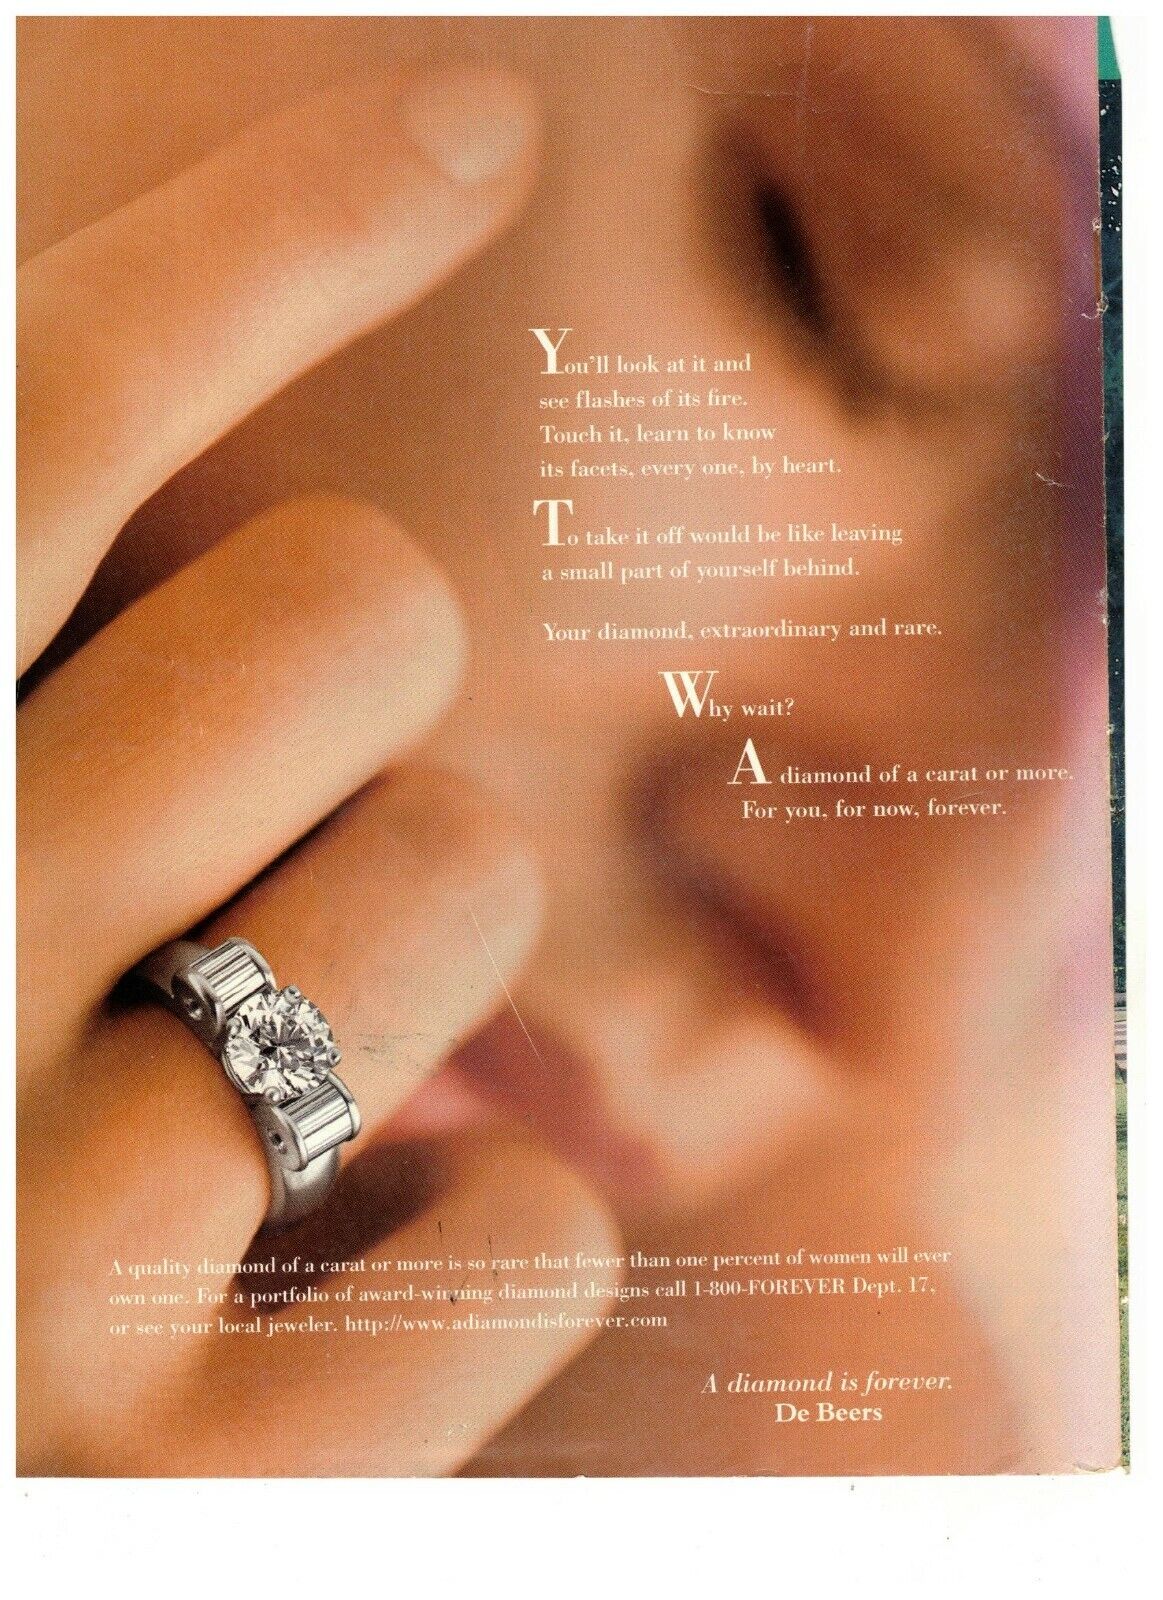 De Beers Diamond is Forever Engagement Ring Vintage 1993 Print Ad